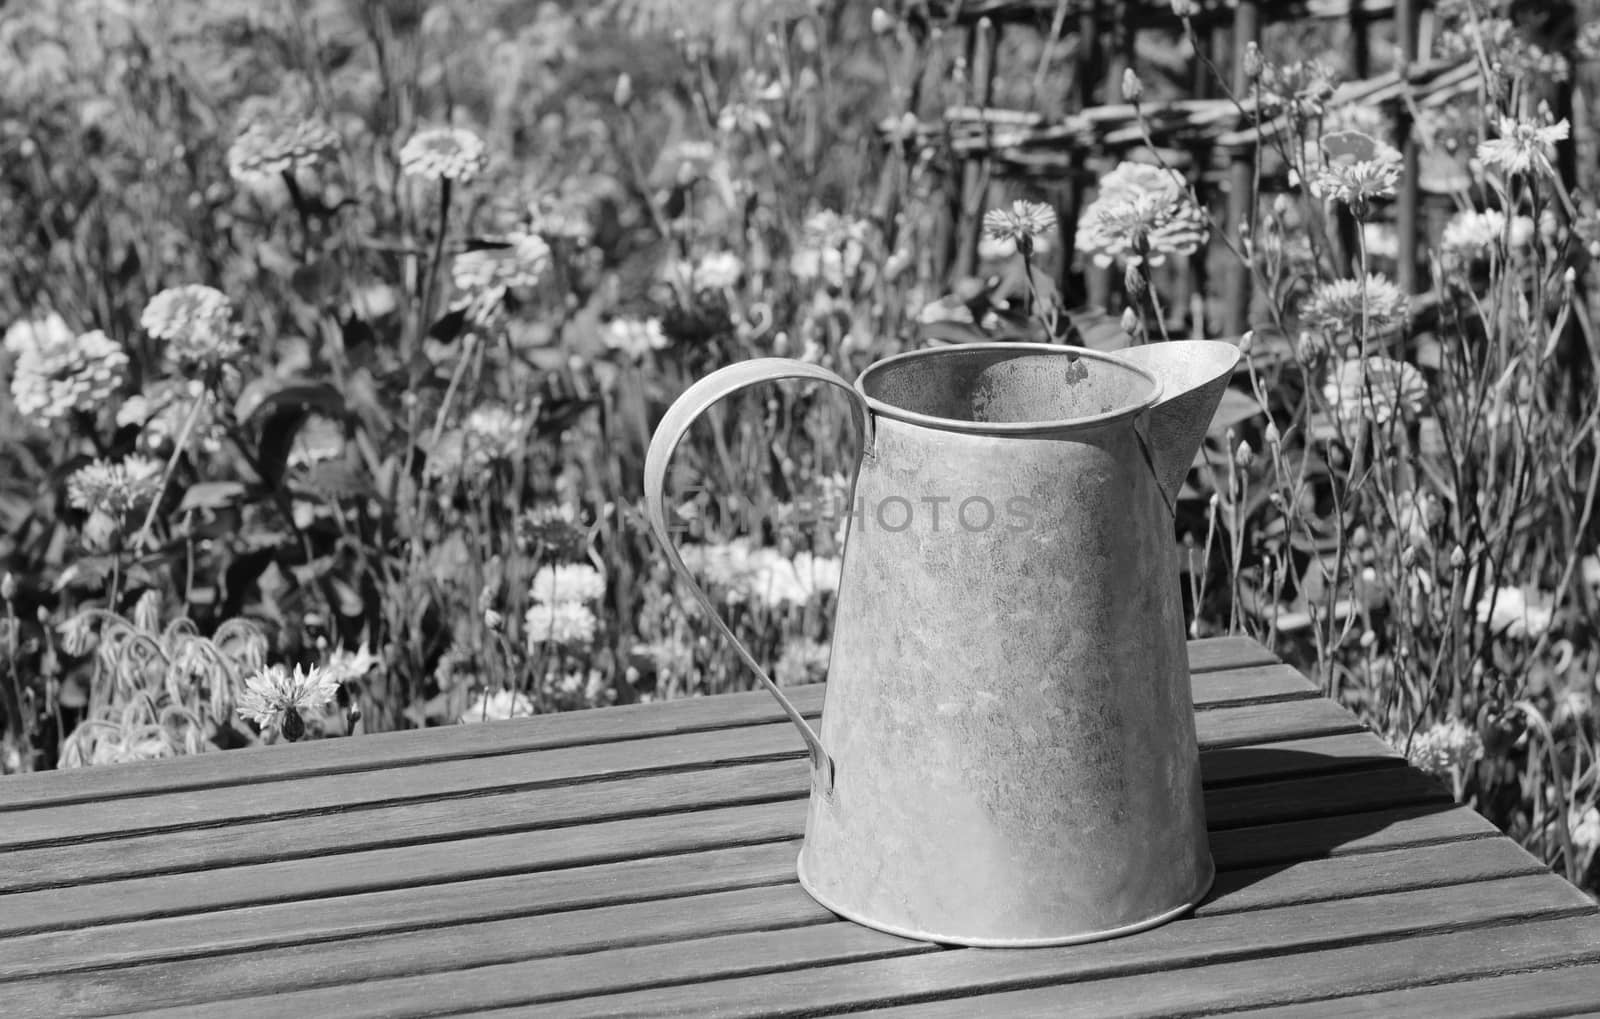 Empty metal pitcher stands on a wooden table in a summer flower garden, with zinnias and cornflowers in the background - monochrome processing